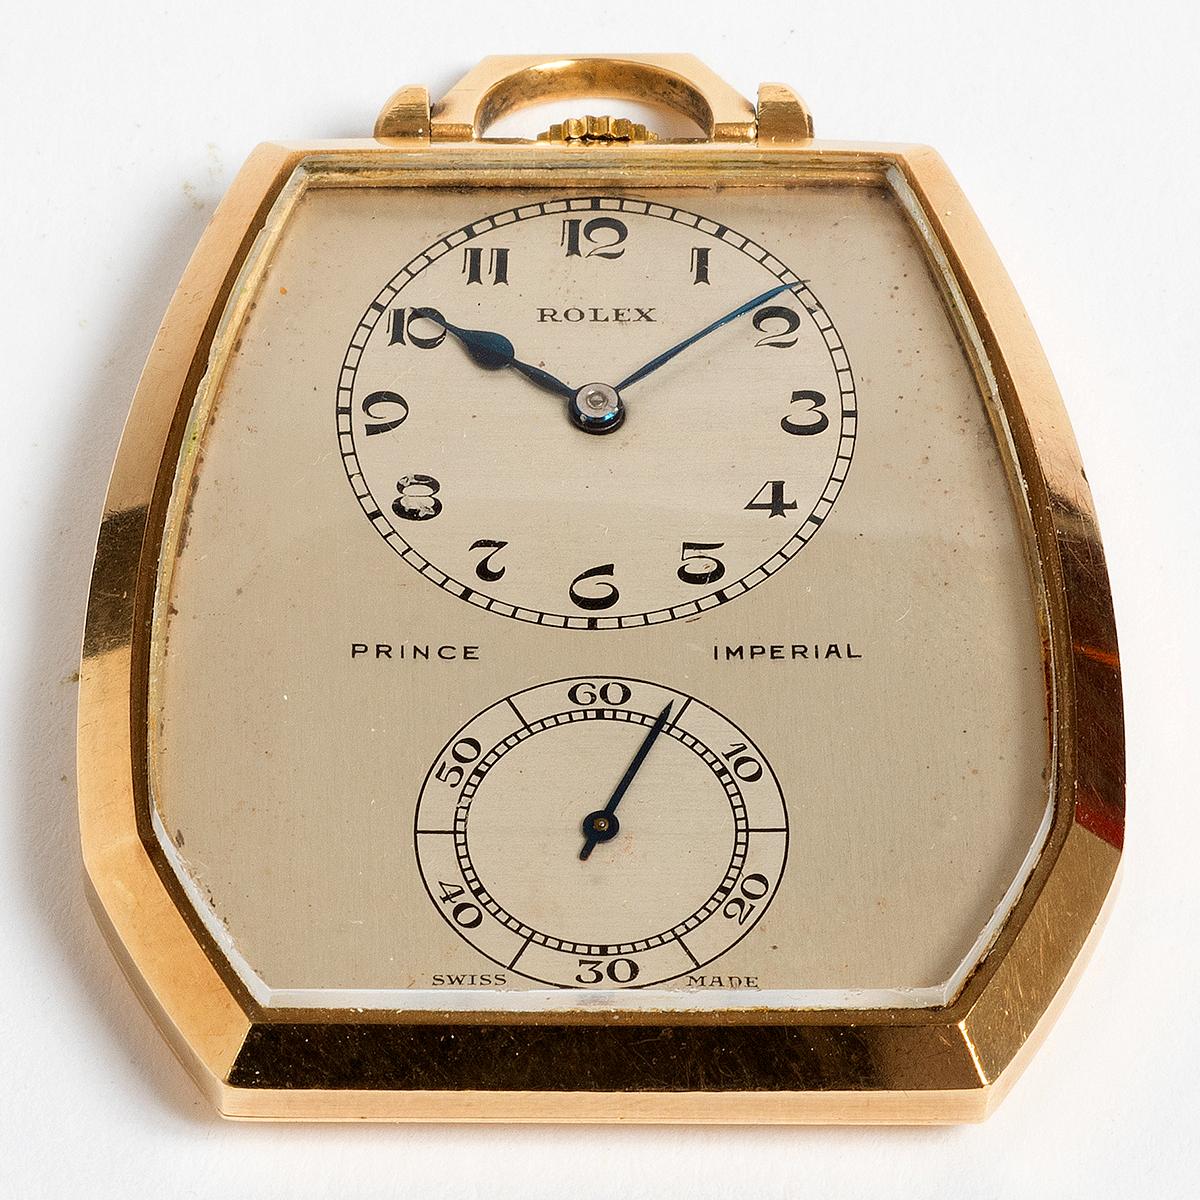 Our very rare and attractive Rolex Prince Imperial pocket watch features a 9k yellow gold case of c.45mm x 40mm. Of note is the original dial, with arabic numerals of a deco style to the hour and minute, with sub dial seconds. This is a highly